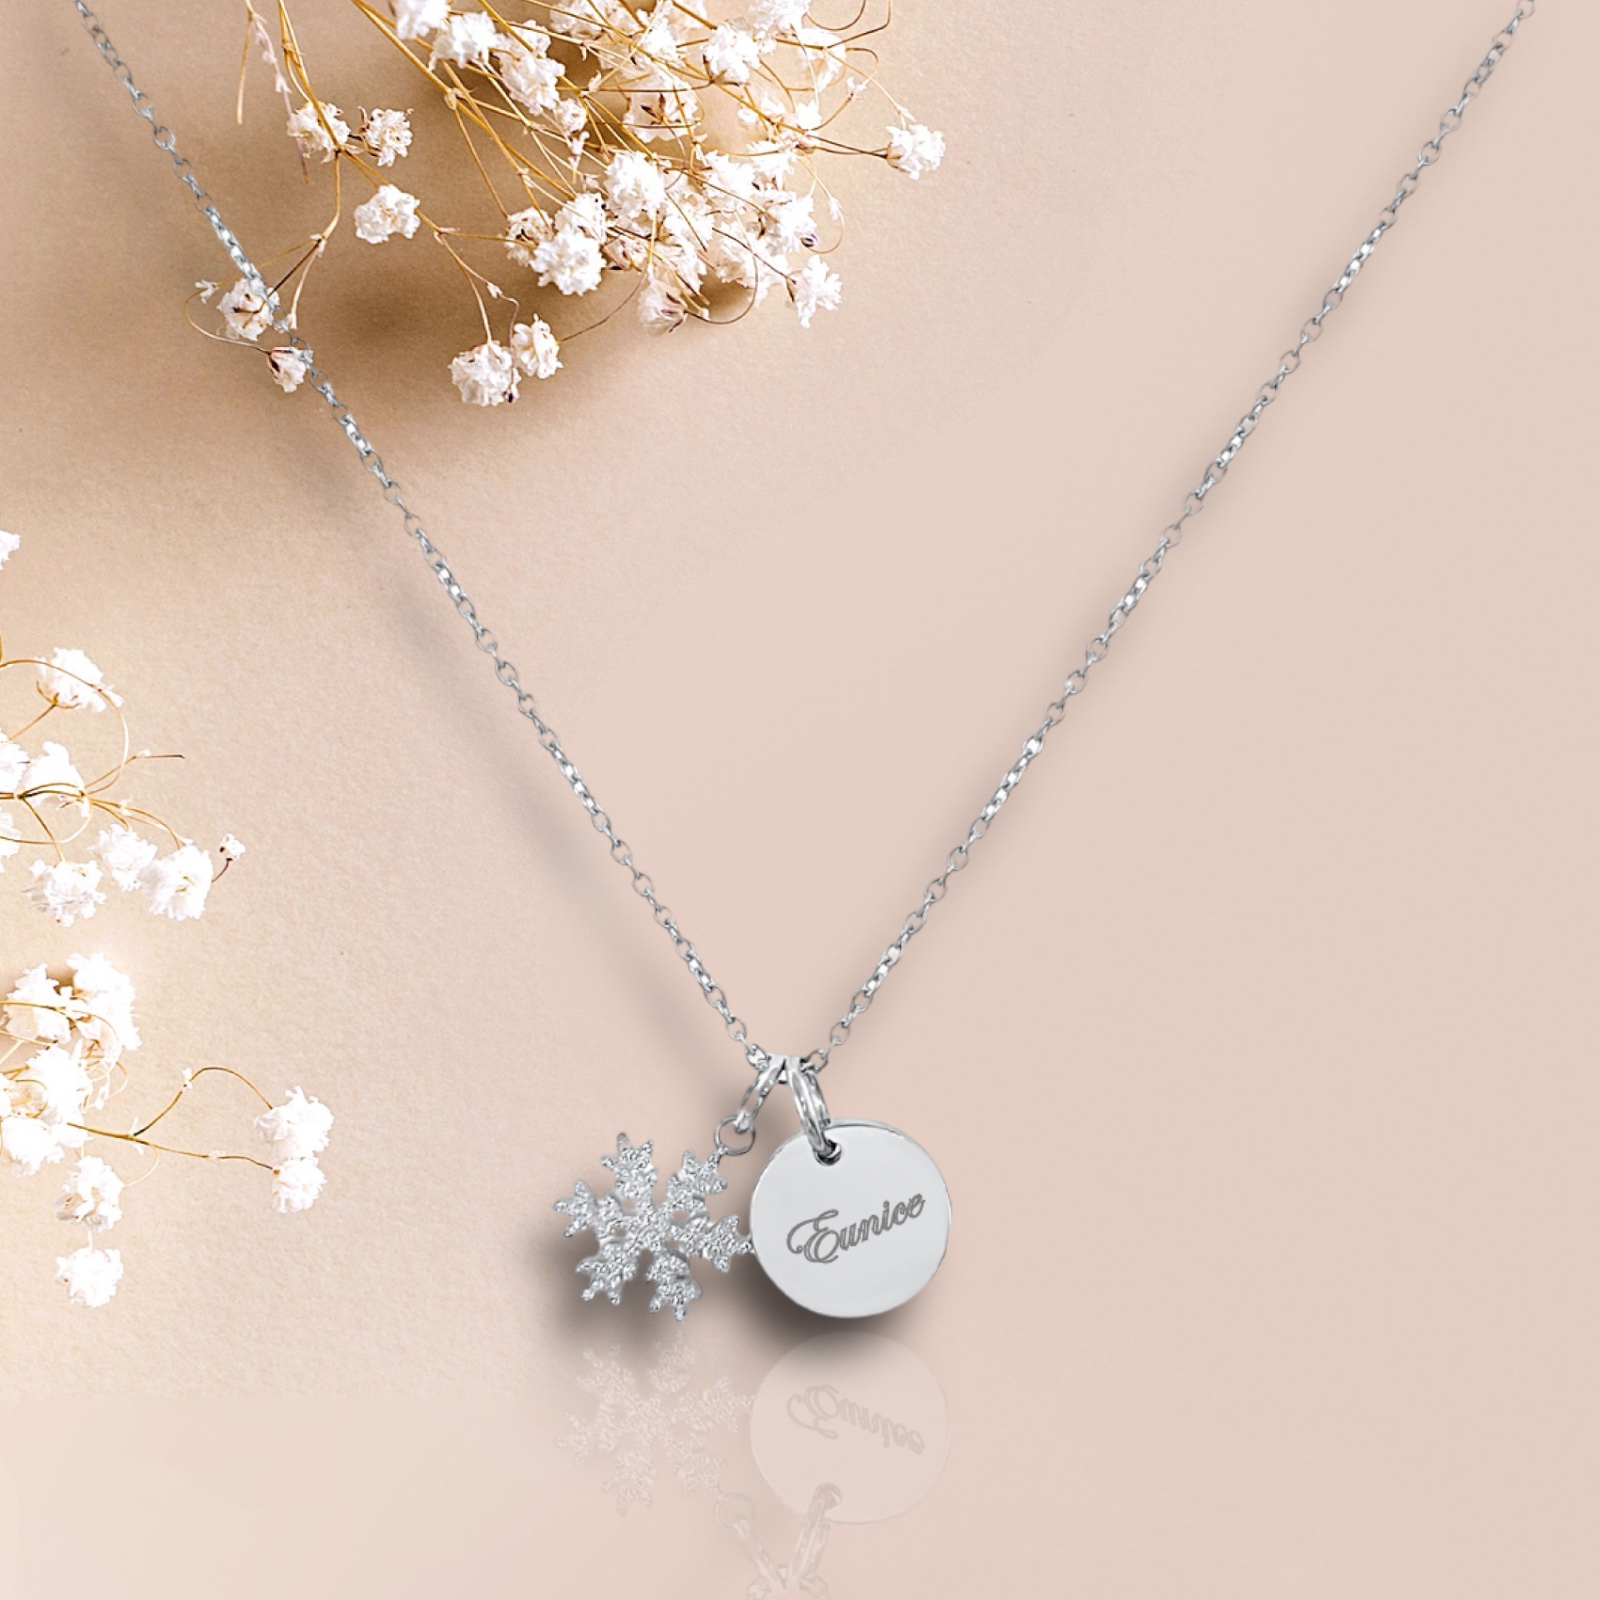 Snowflake Charm Necklace - Silver